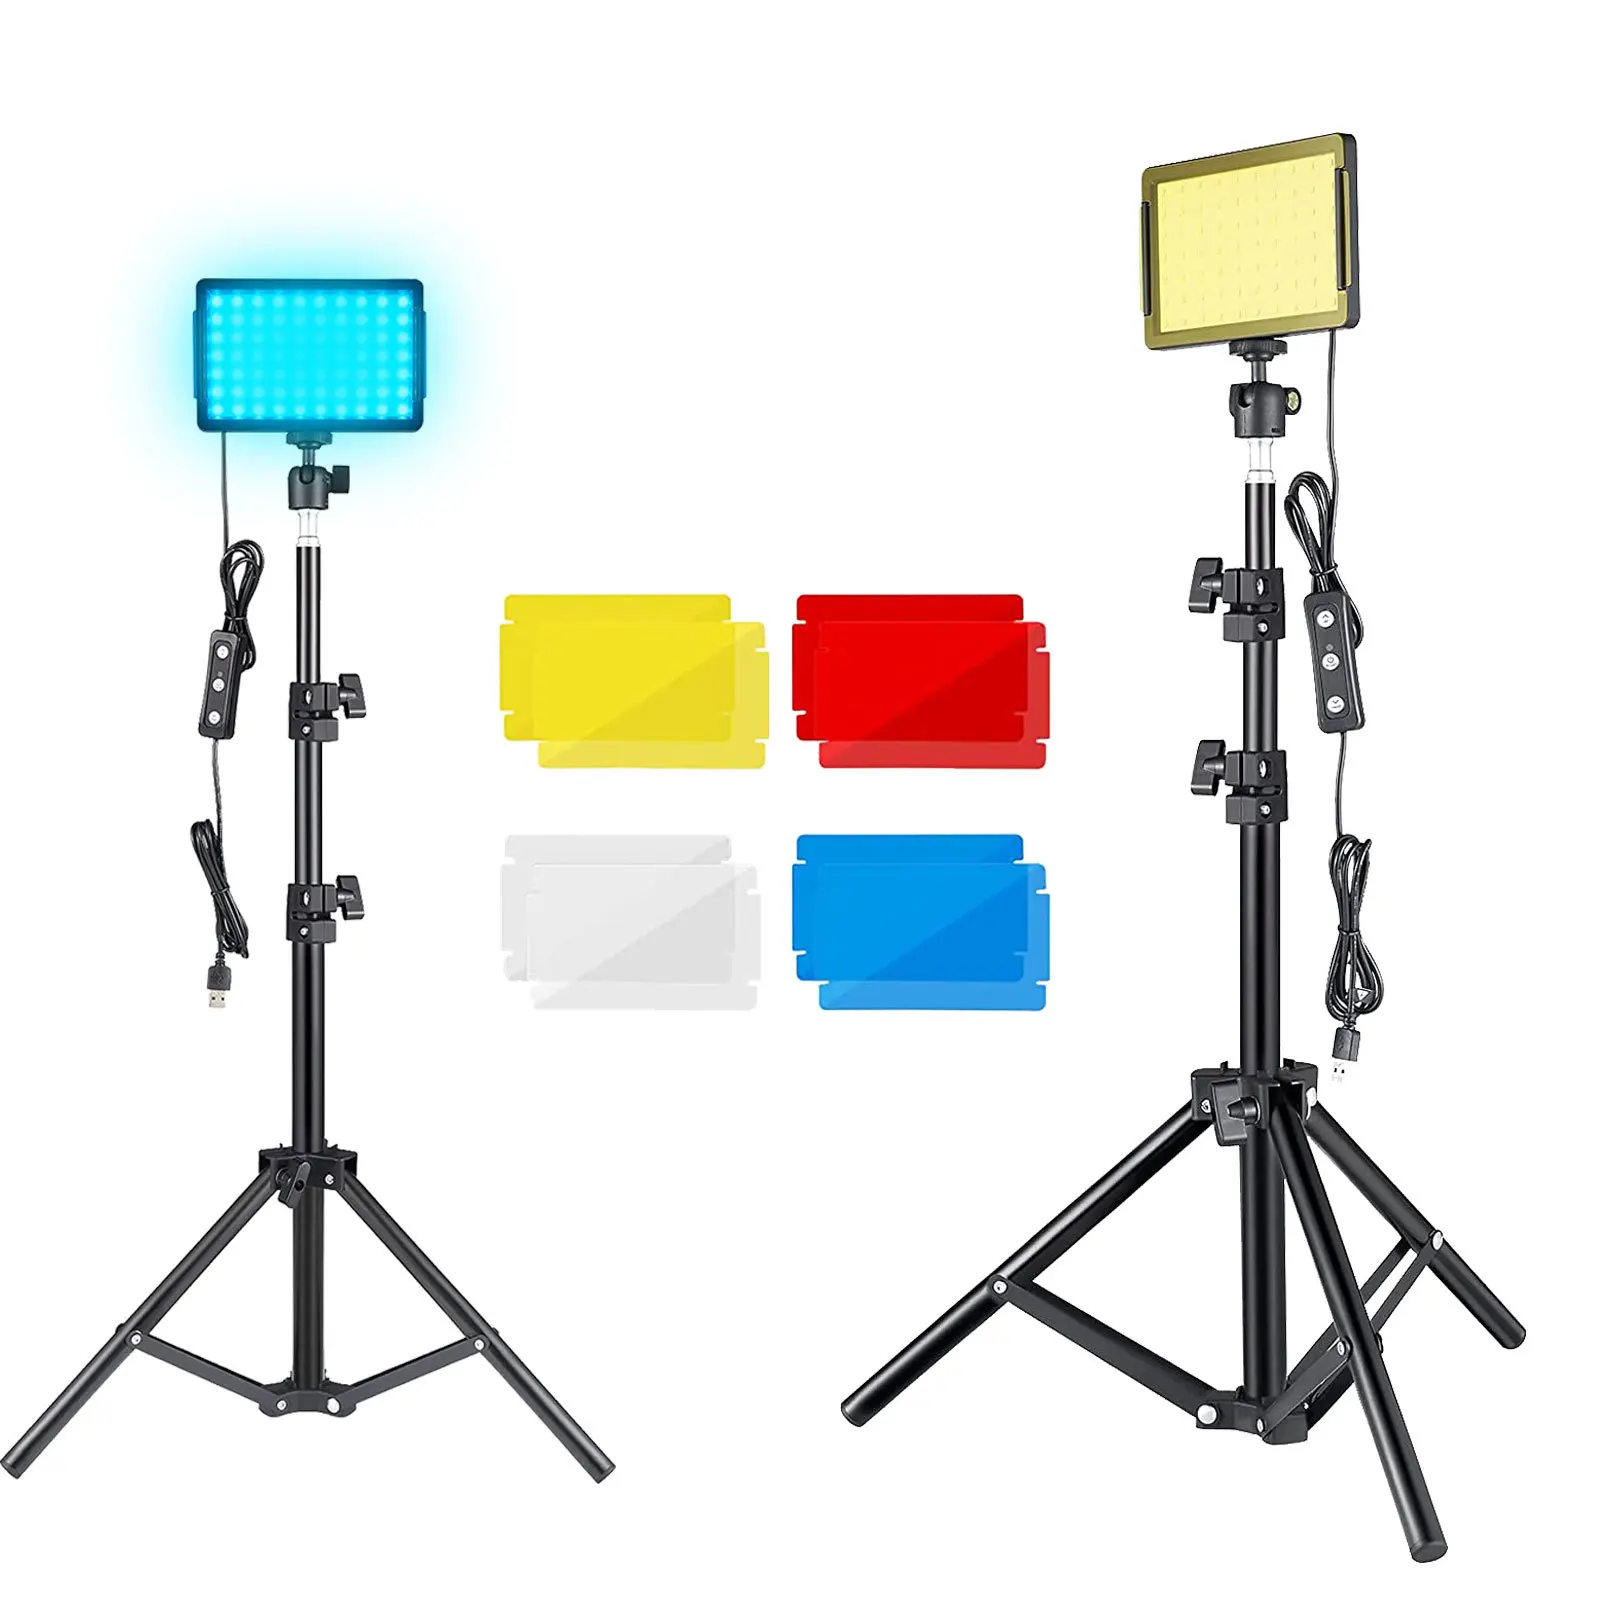 

LED Photography Video Light Panel Lighting Photo Studio Lamp Kit With Tripod Stand RGB Filters For Shoot Live Youbube Streaming